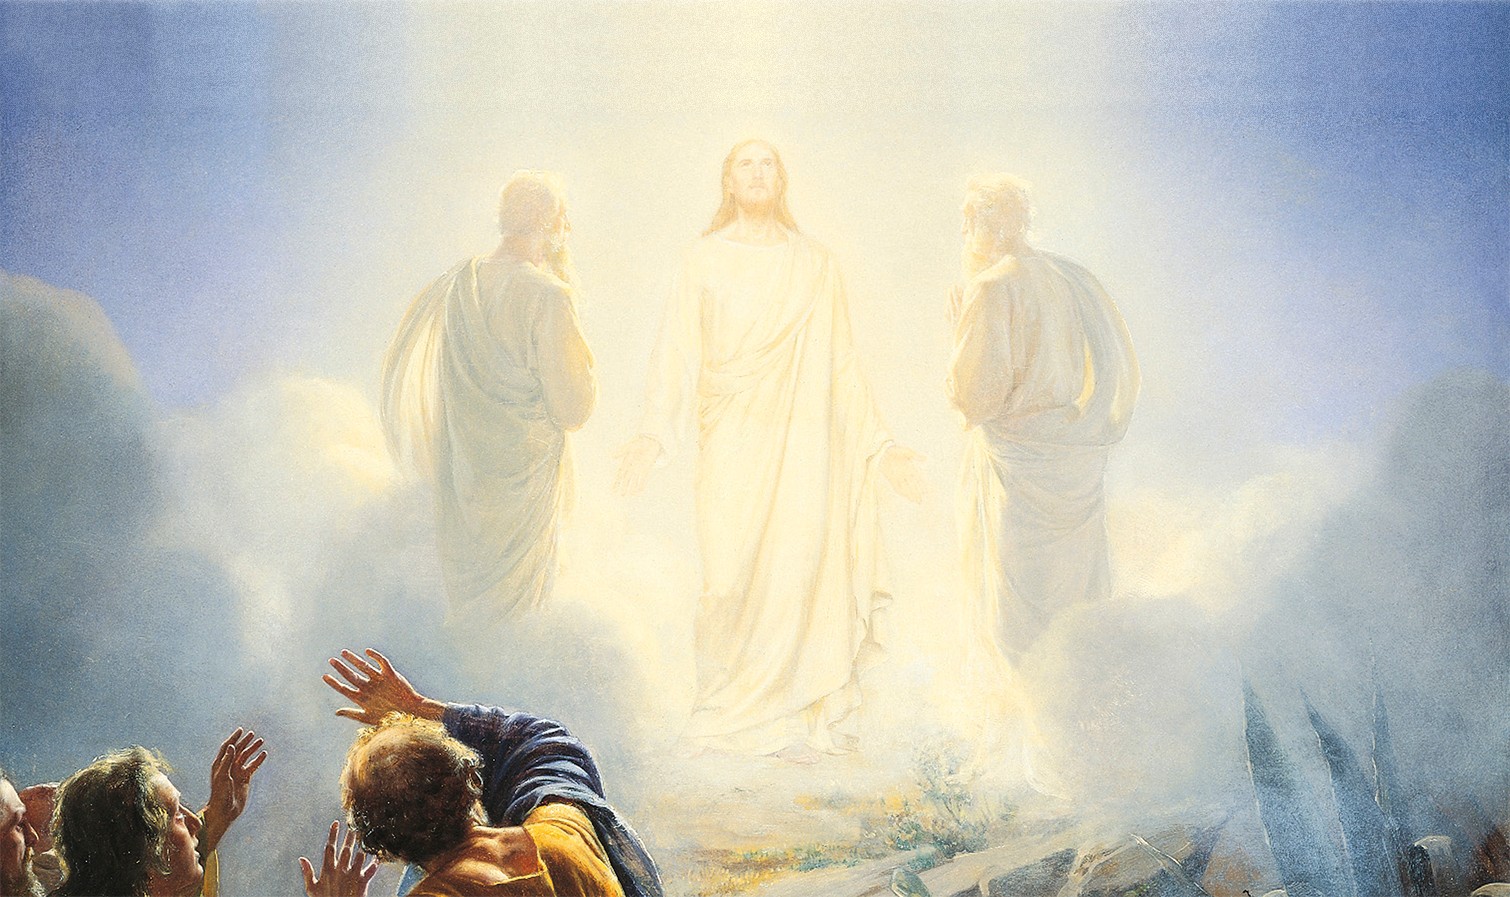 The apostles Peter, James and John witnessing the transfiguration of Christ. Christ is surrounded by light. Moses and Elias (Elijah) appear as transfigured beings surrounded by the same light. Peter, James and John are shielding their eyes from the brightness of the light.